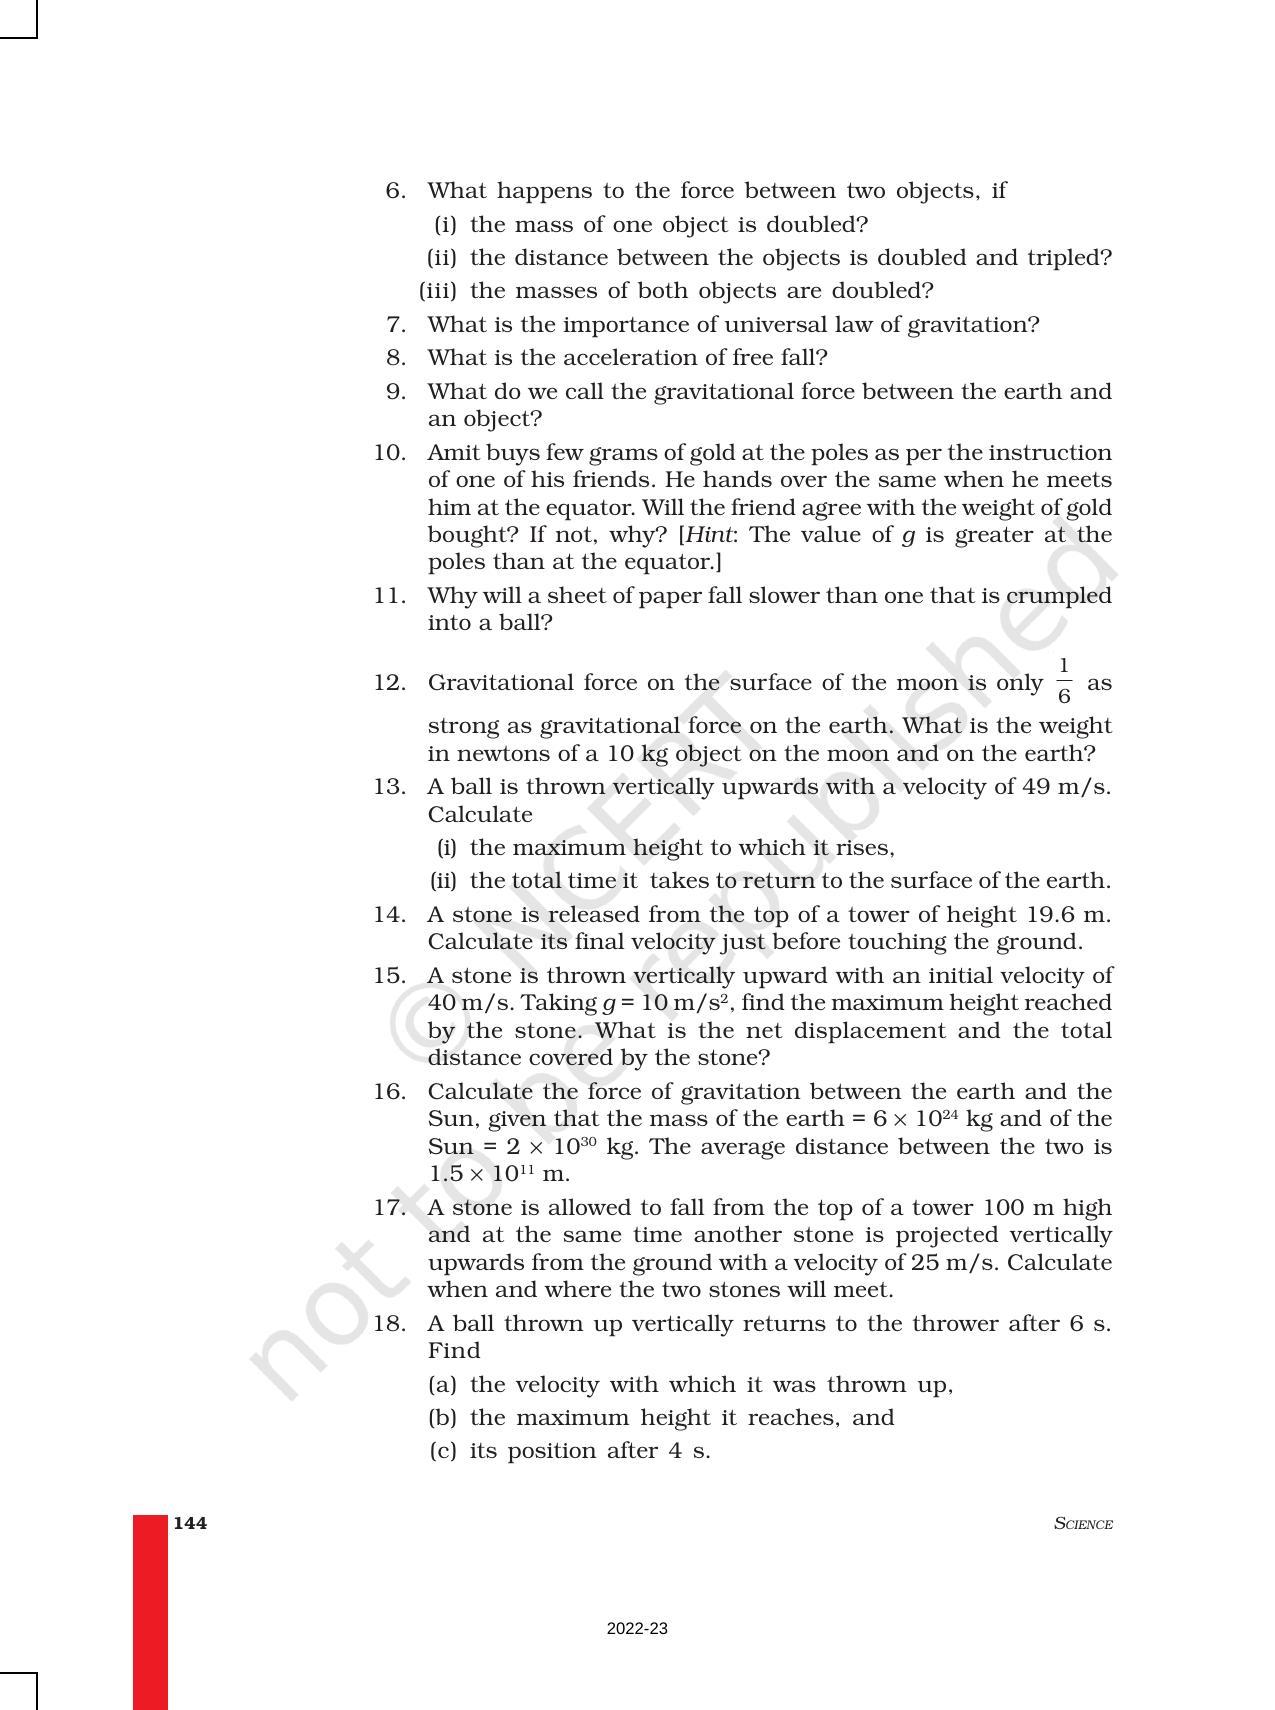 NCERT Book for Class 9 Science Chapter 10 Gravitation - Page 14